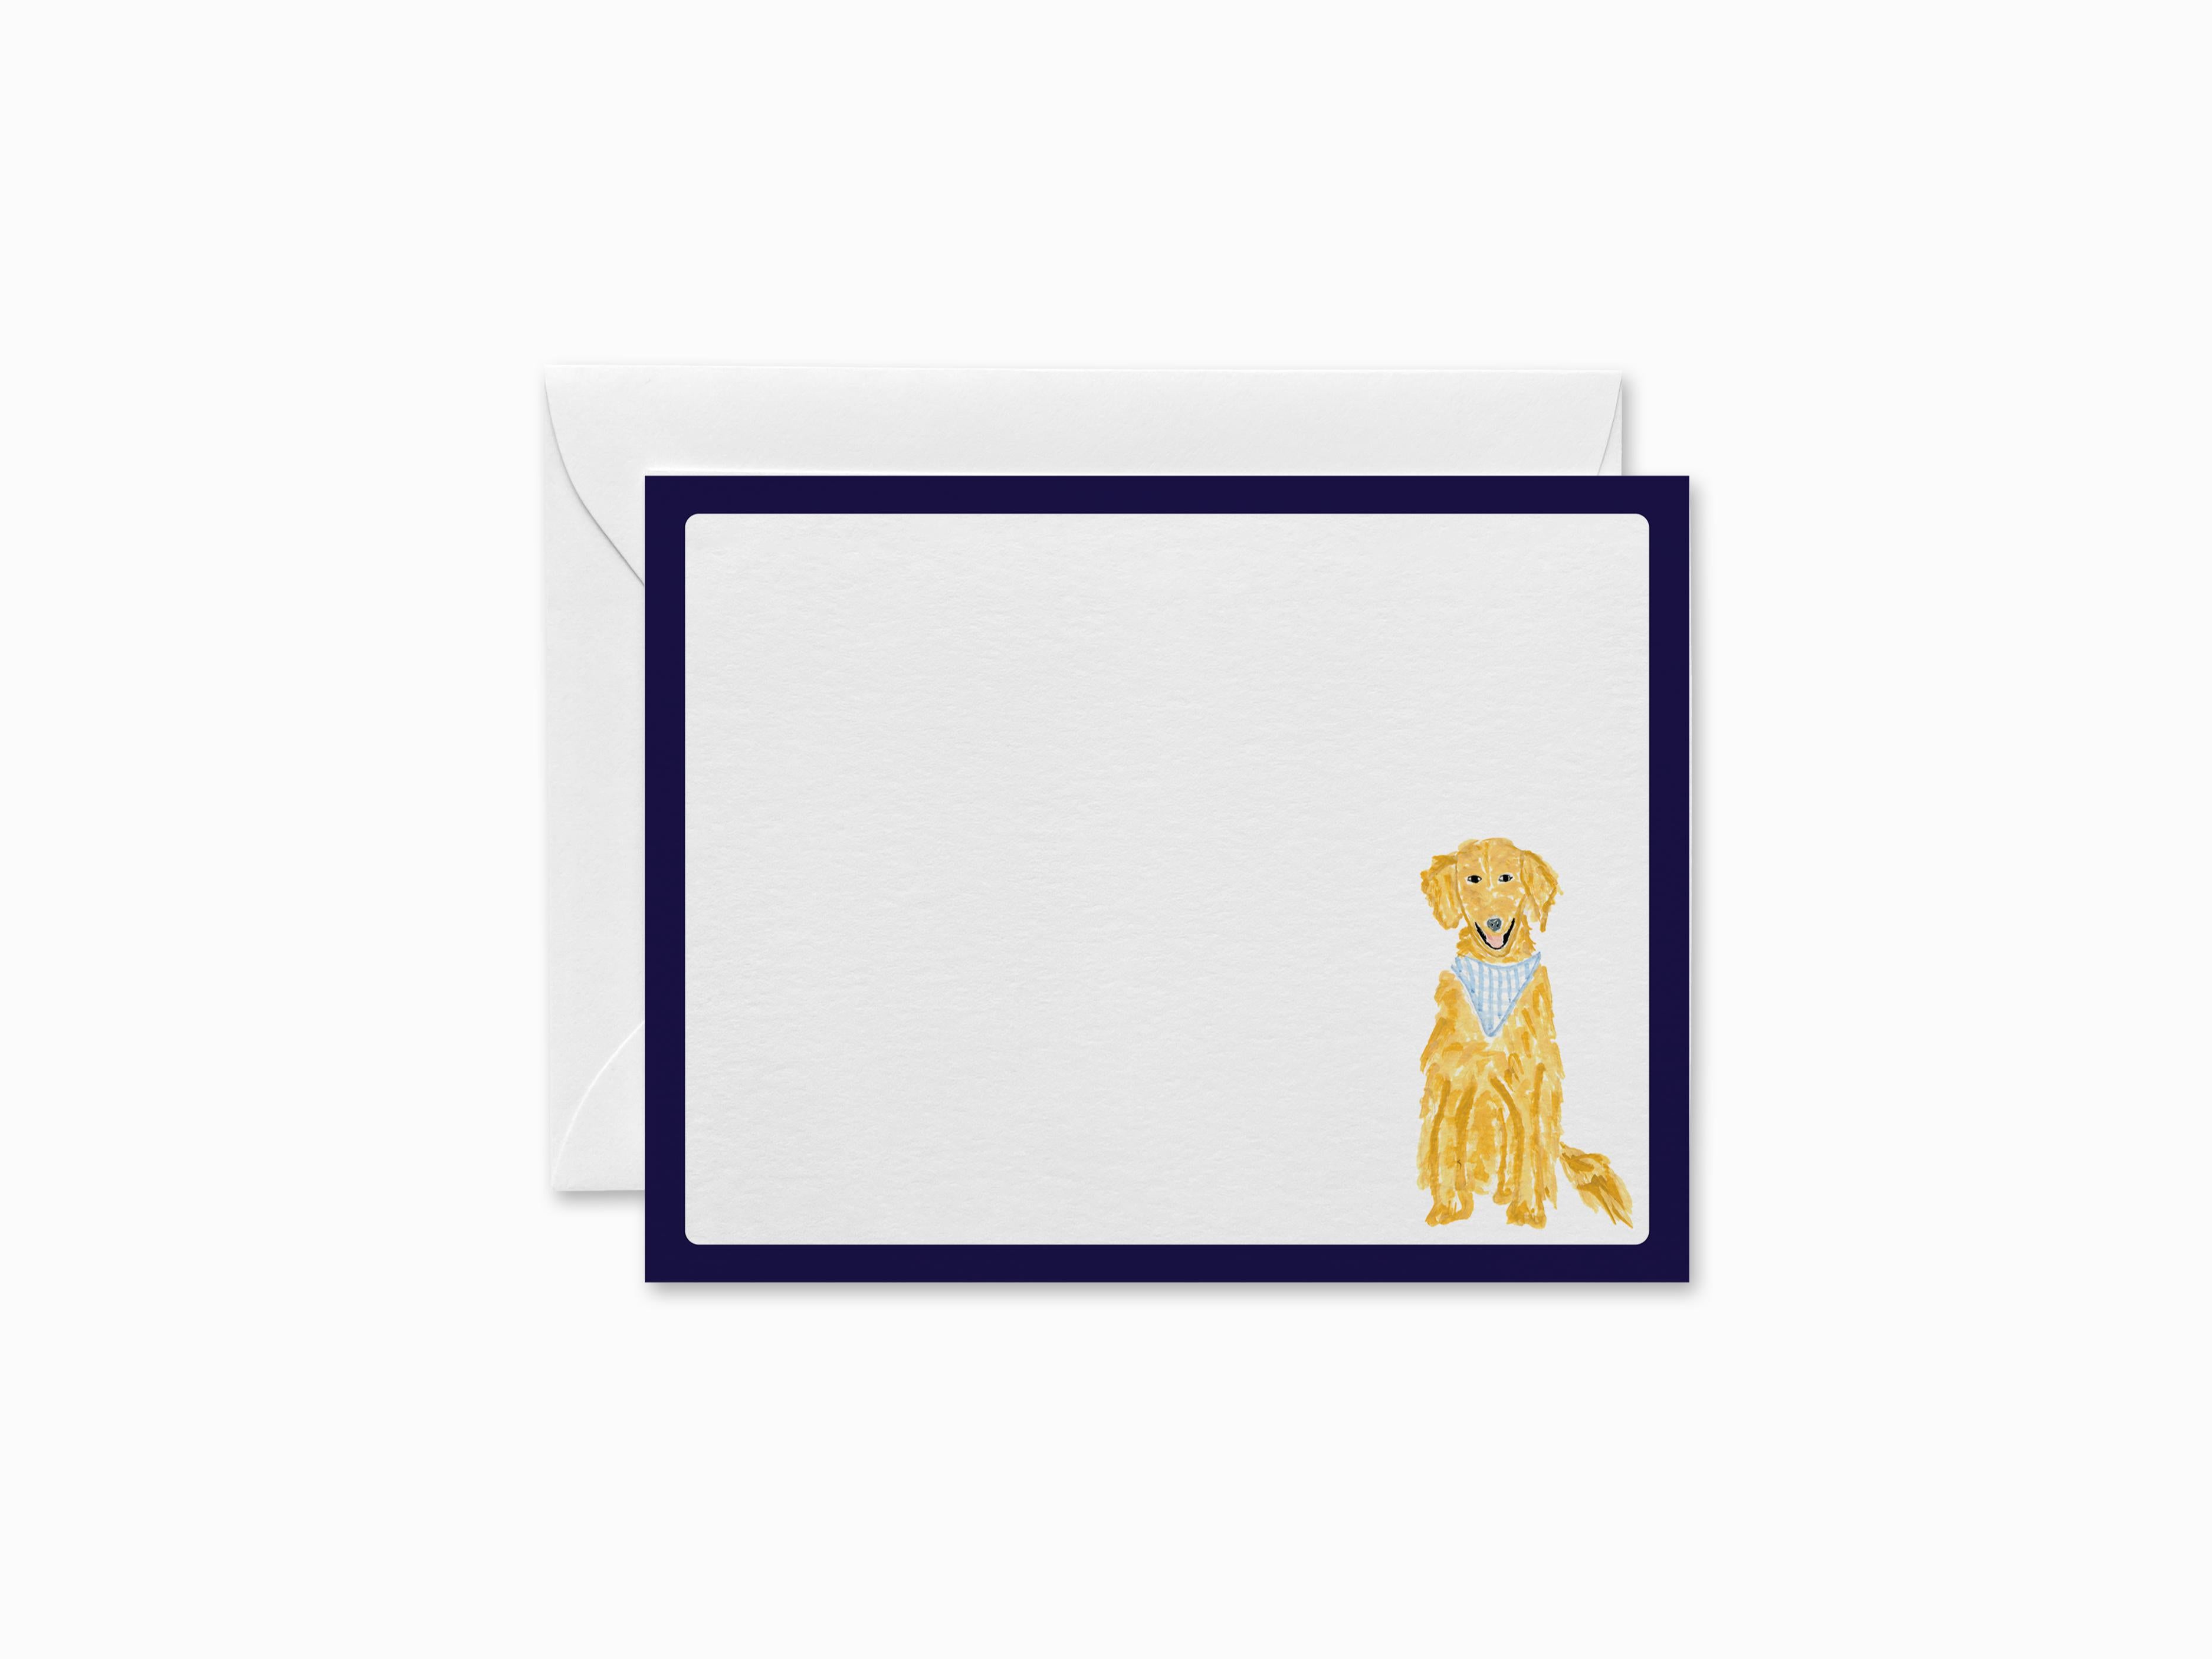 Golden Retriever Flat Notes [Sets of 8]-These flat notecards are 4.25x5.5 and feature our hand-painted watercolor dog, printed in the USA on 120lb textured stock. They come with white envelopes and make great thank yous and gifts for the puppy lover in your life.-The Singing Little Bird